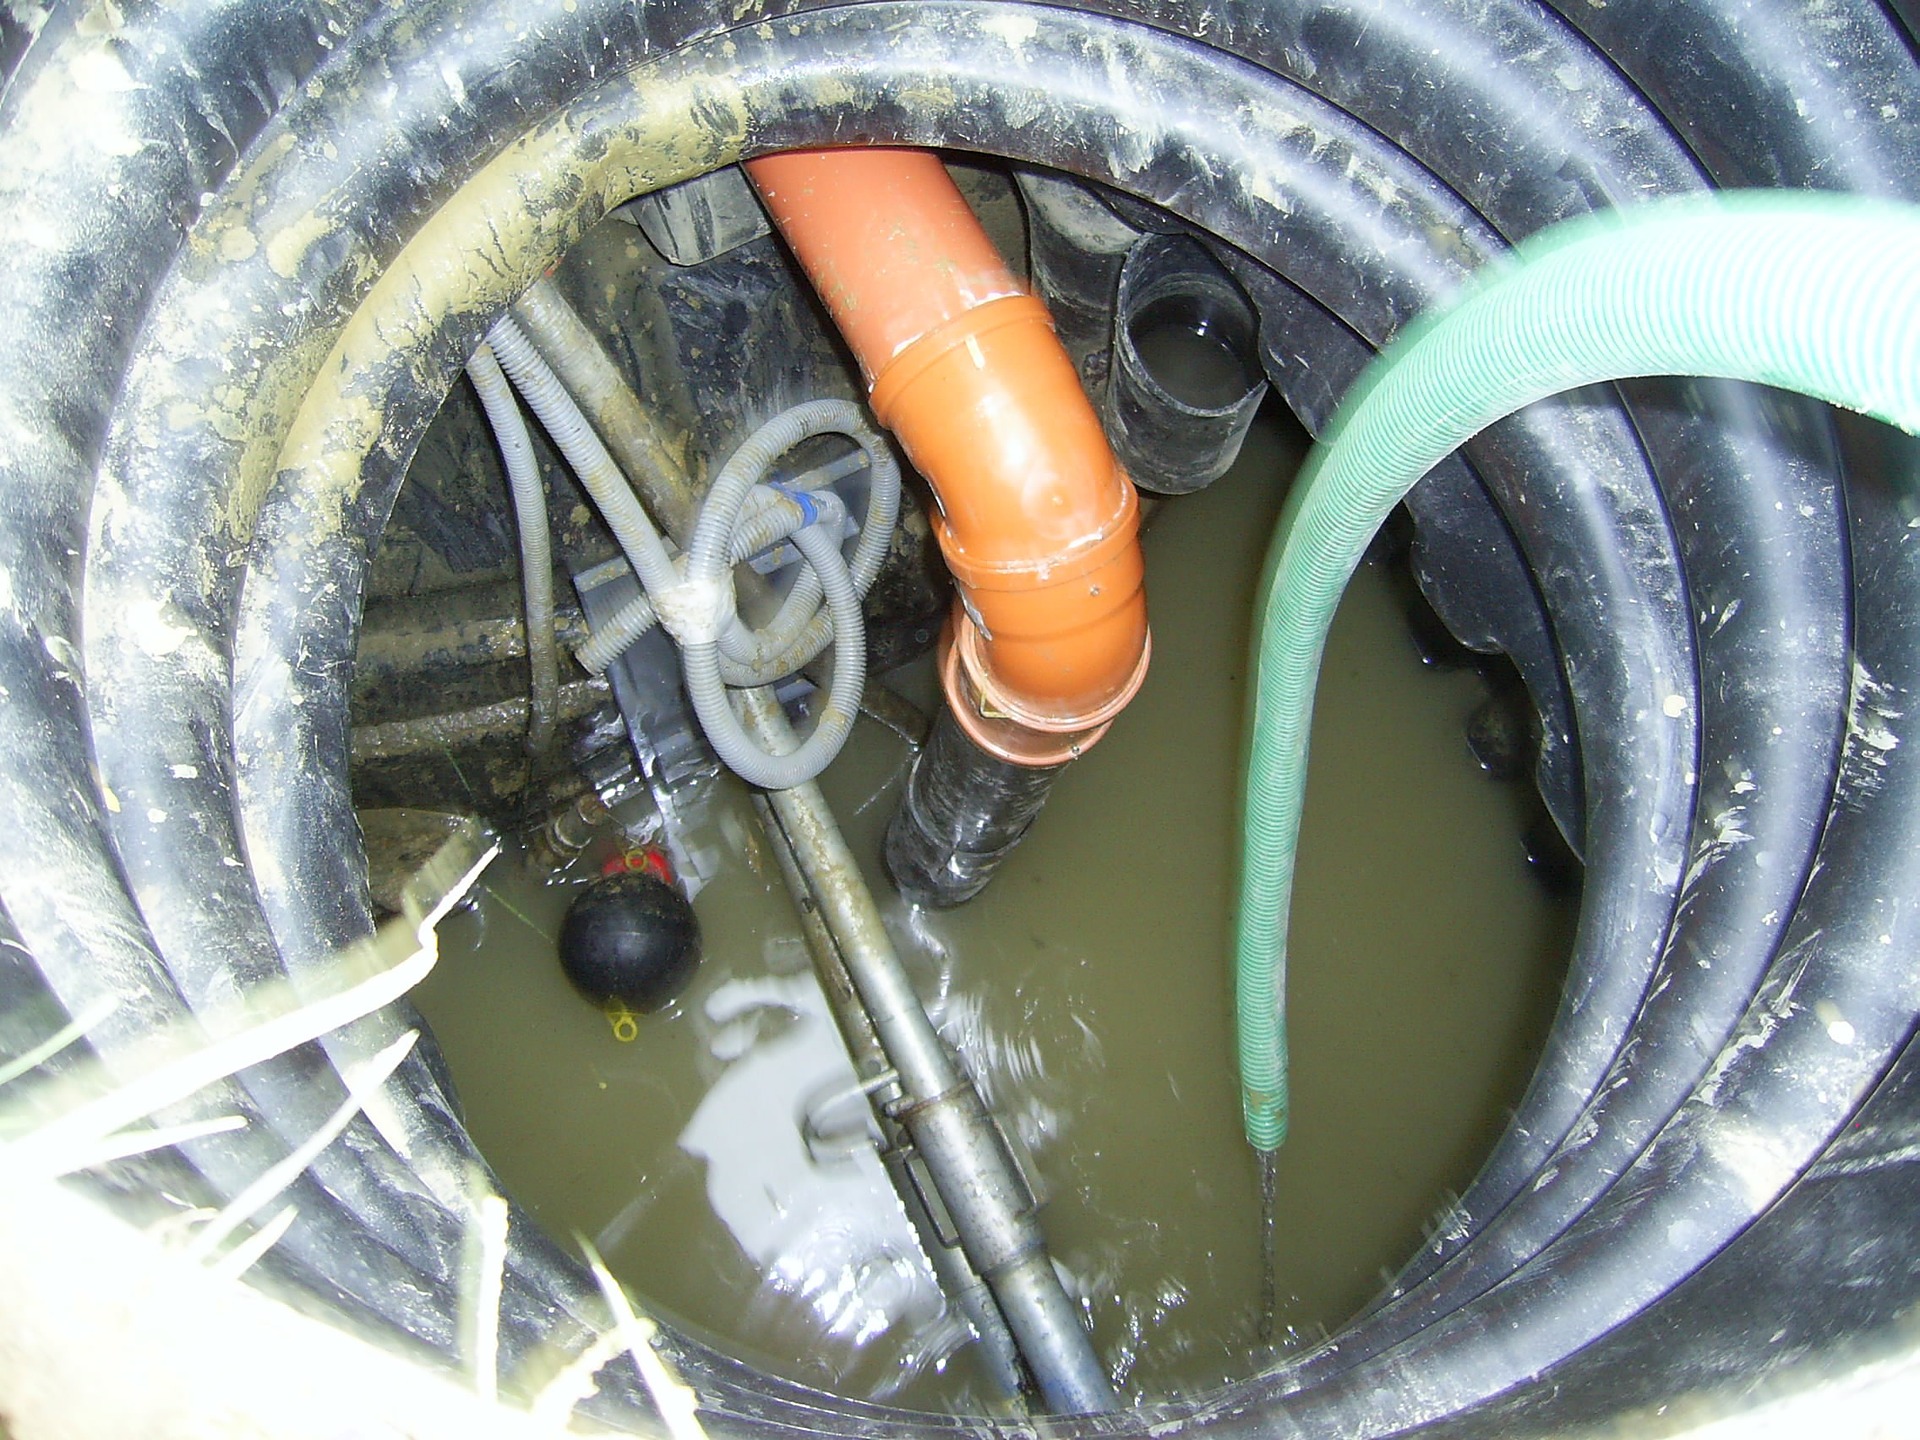 sewer cleanup services